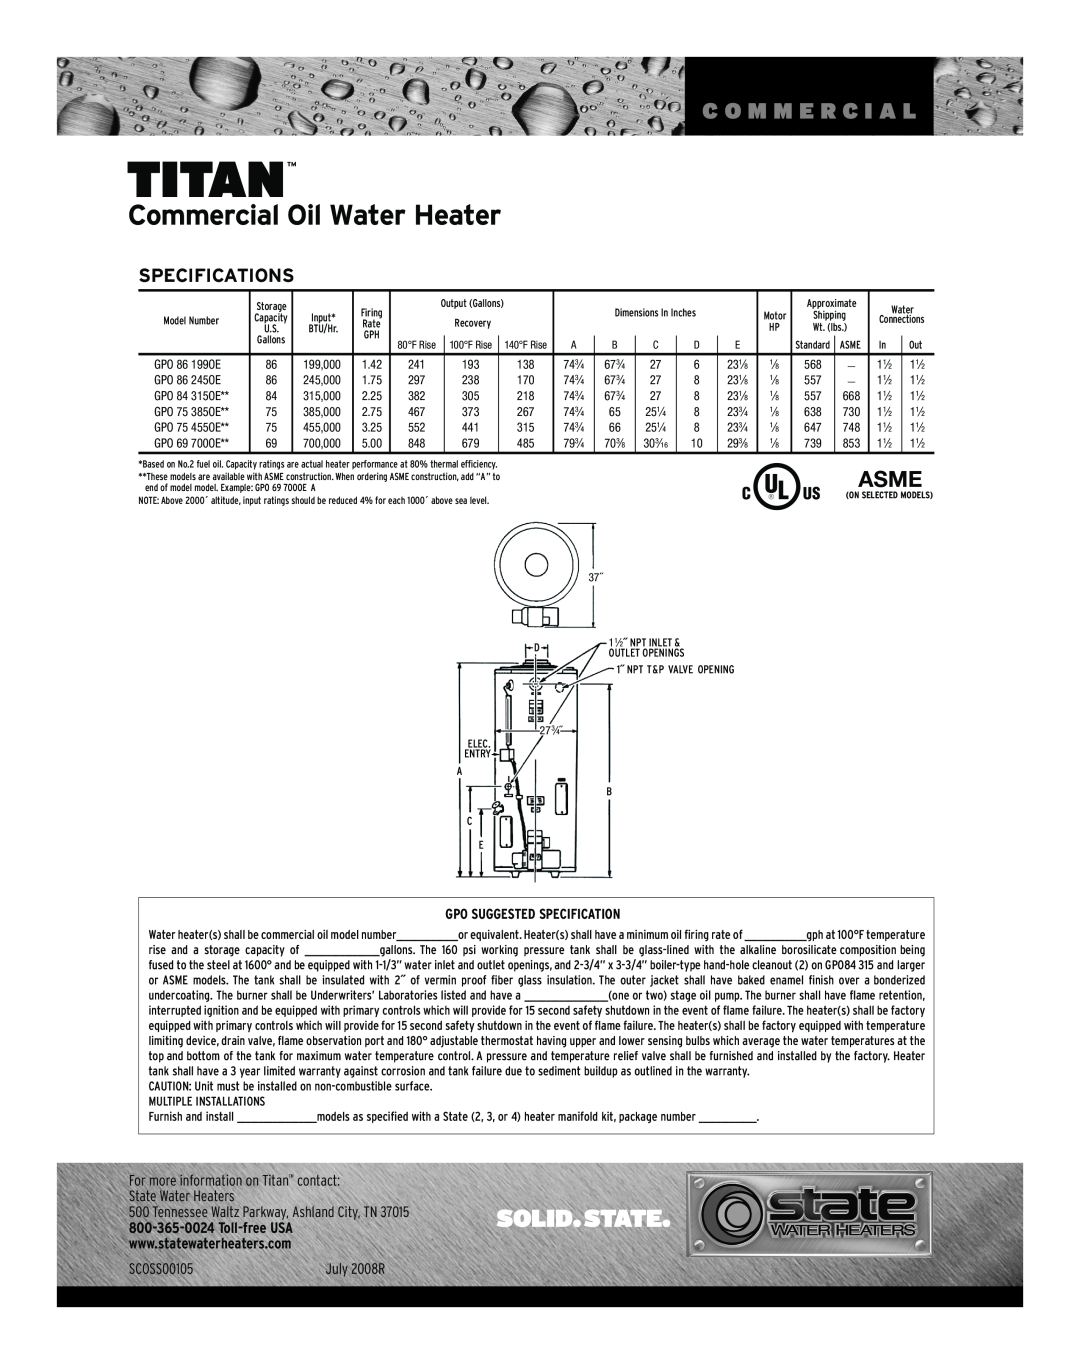 State Industries GPO84 315 Specifications, Titan, Commercial Oil Water Heater, C O M M E R C I A L, Asme, SCOSS00105 